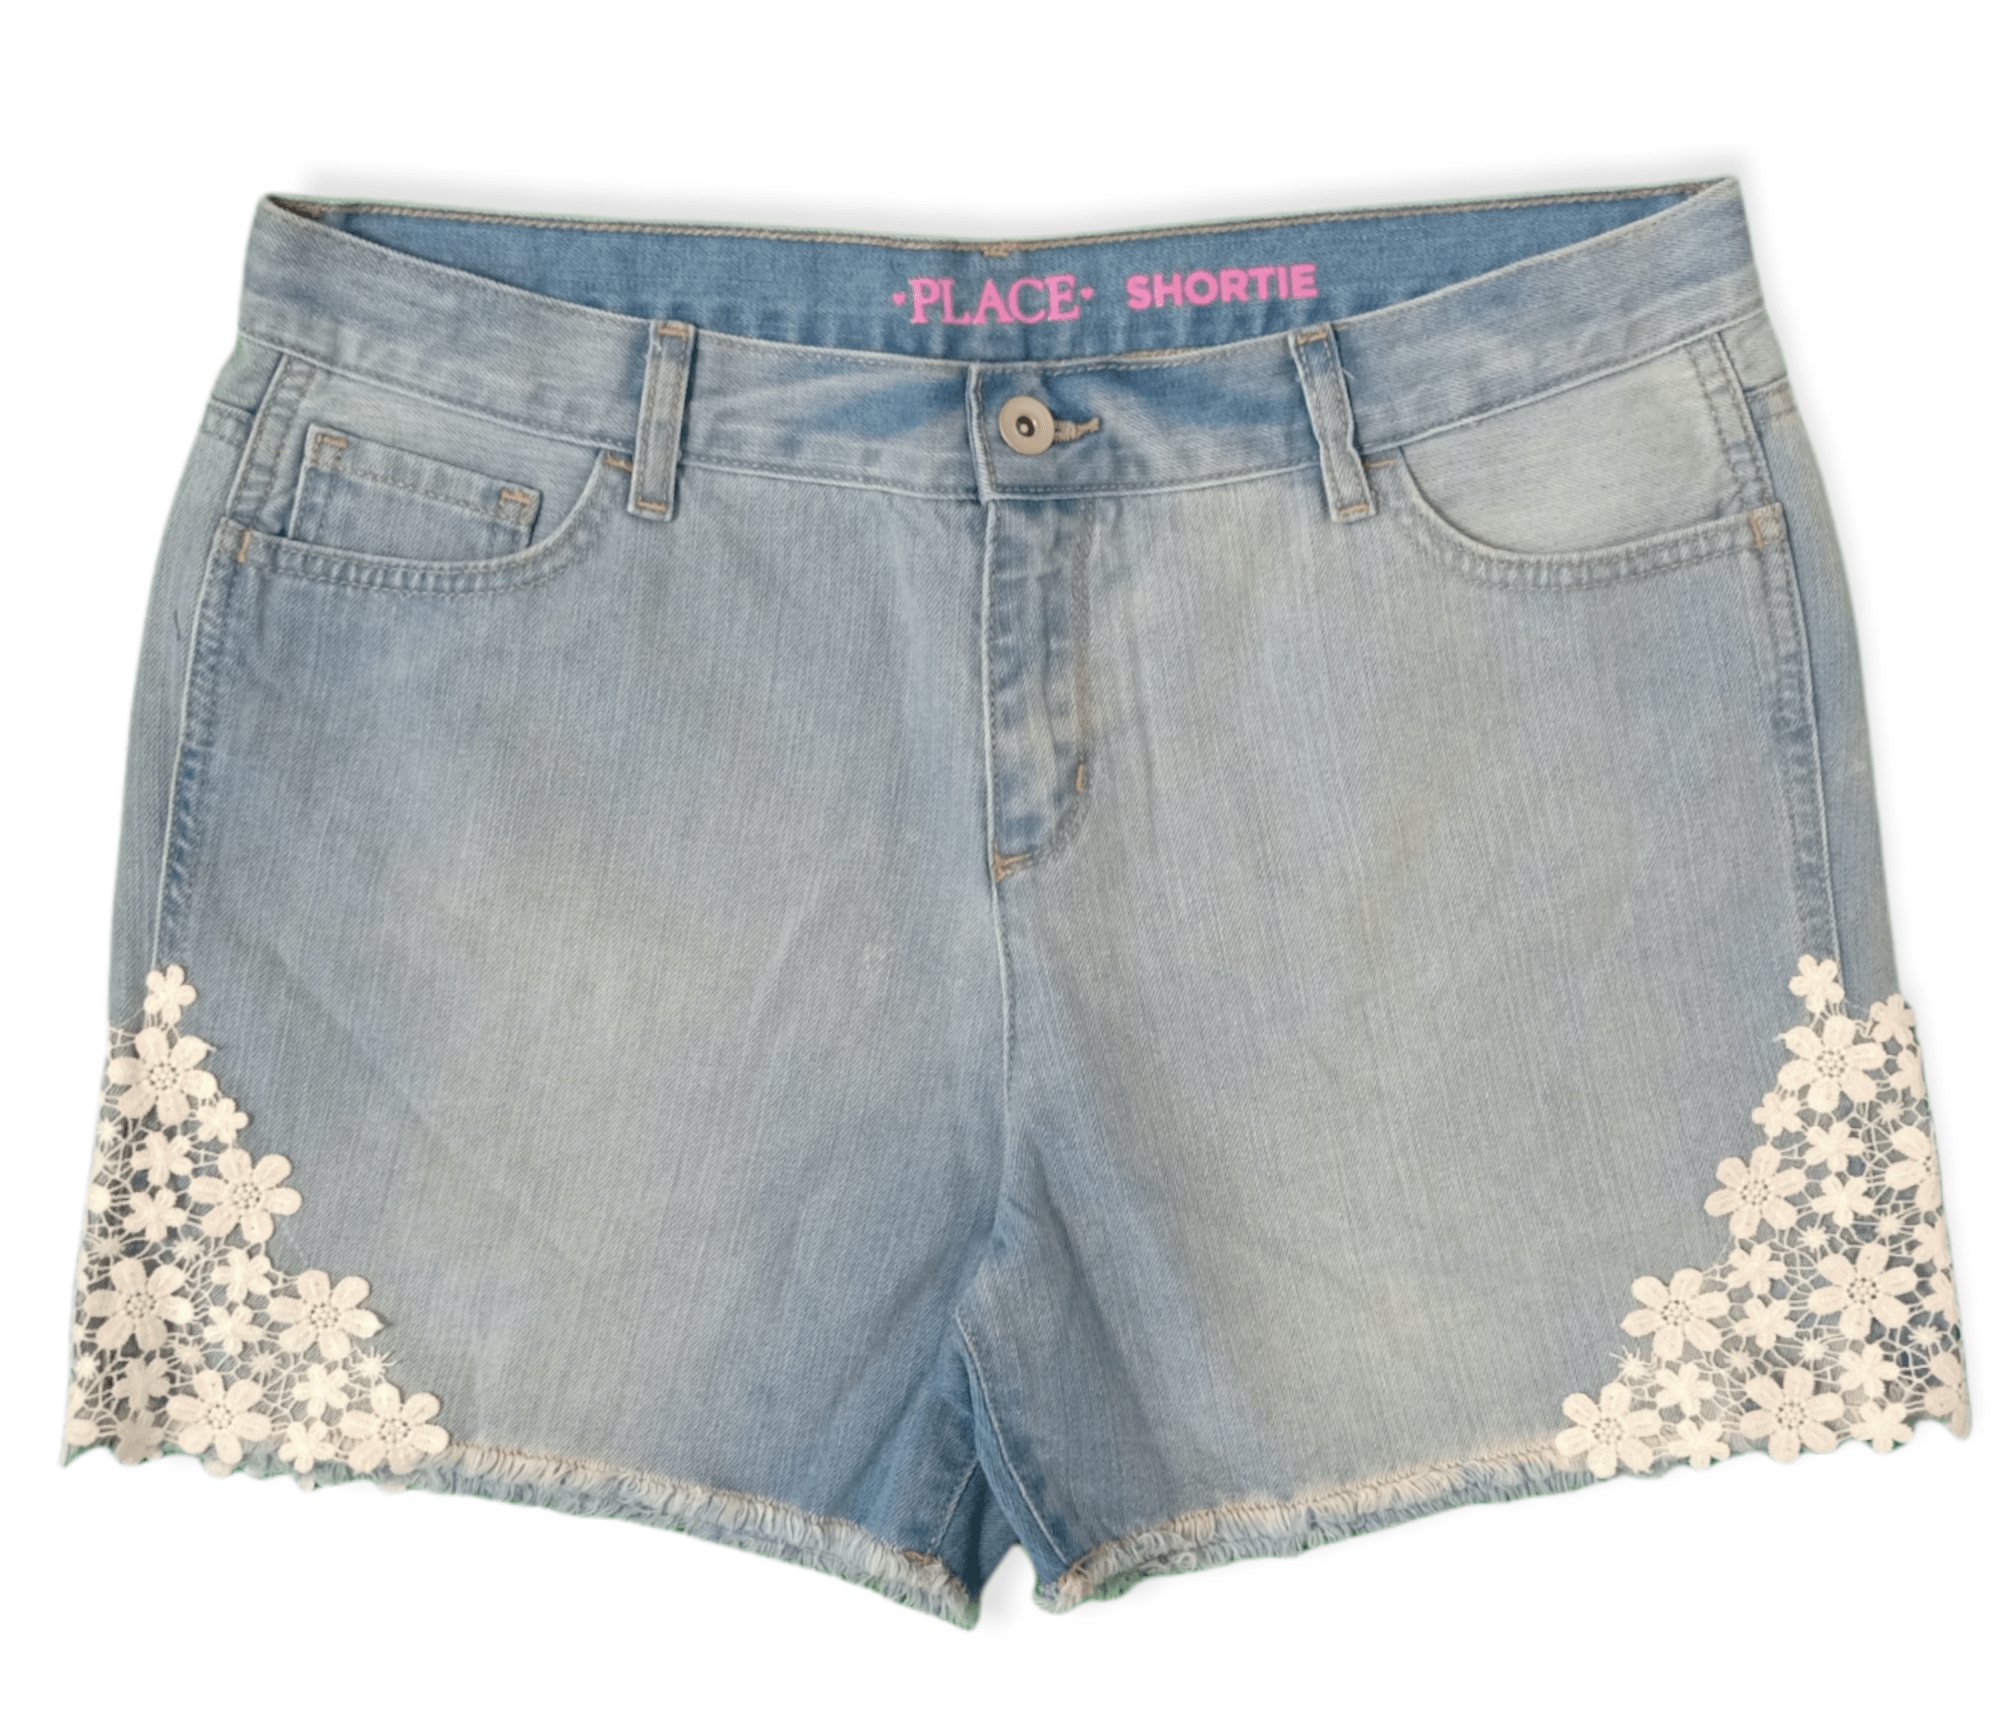 ElOutlet-Sumer Kids Kids Shorts [Kids] Girls Short - Place - Blue Jeans with White Flowers